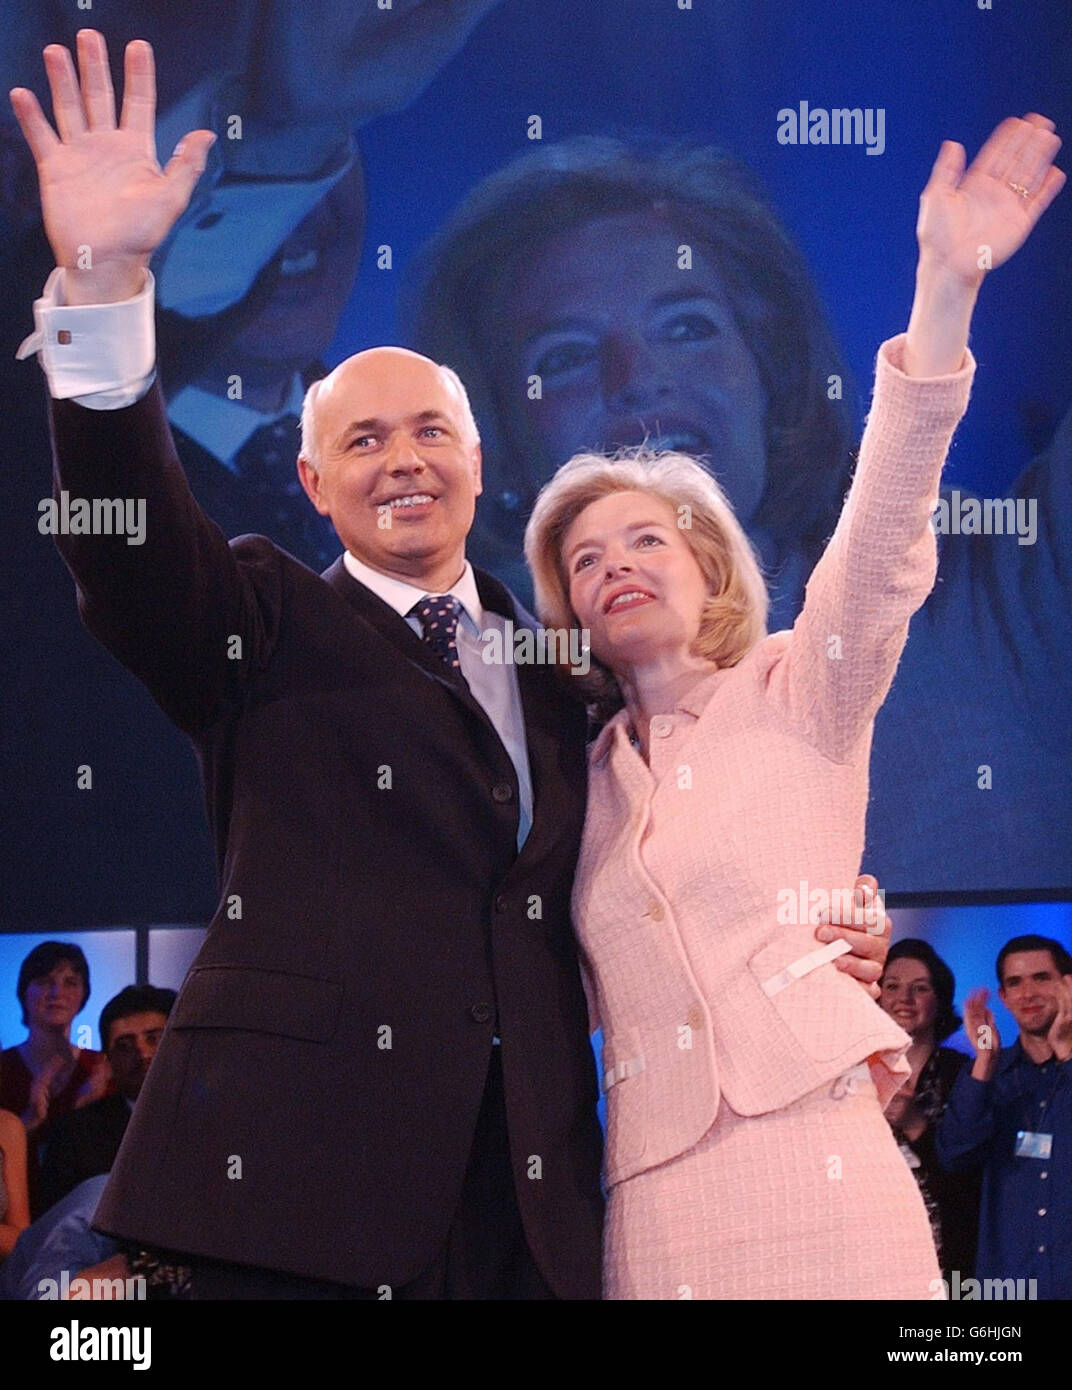 Tory leader Iain Duncan Smith and wife Betsy following his speech at the Conservative Annual Conference held in Blackpool. Mr Duncan Smith warned his party critics: 'Get on board or get out of our way.' Mr Duncan Smith accused the Prime Minister of living in 'BlairWorld' where crime was down, taxes were low and the trains ran on time. Stock Photo